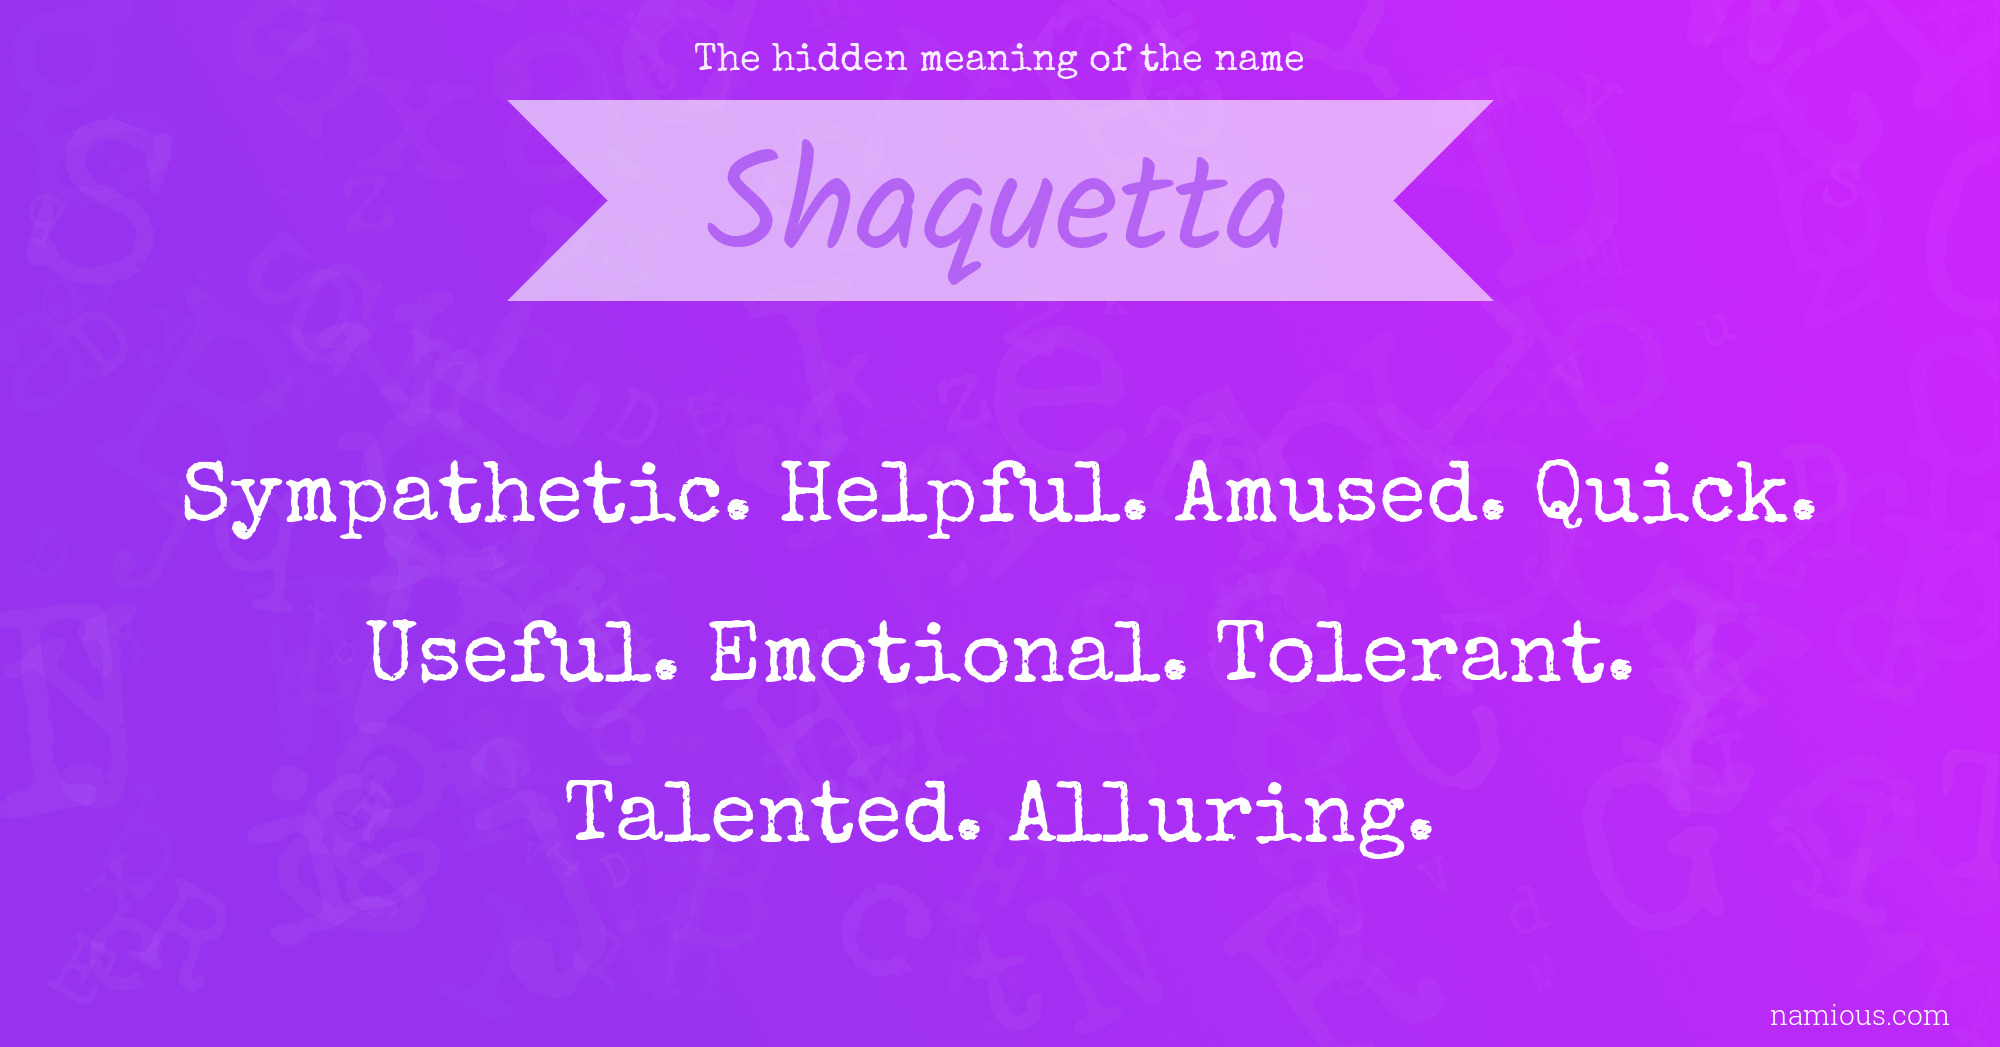 The hidden meaning of the name Shaquetta